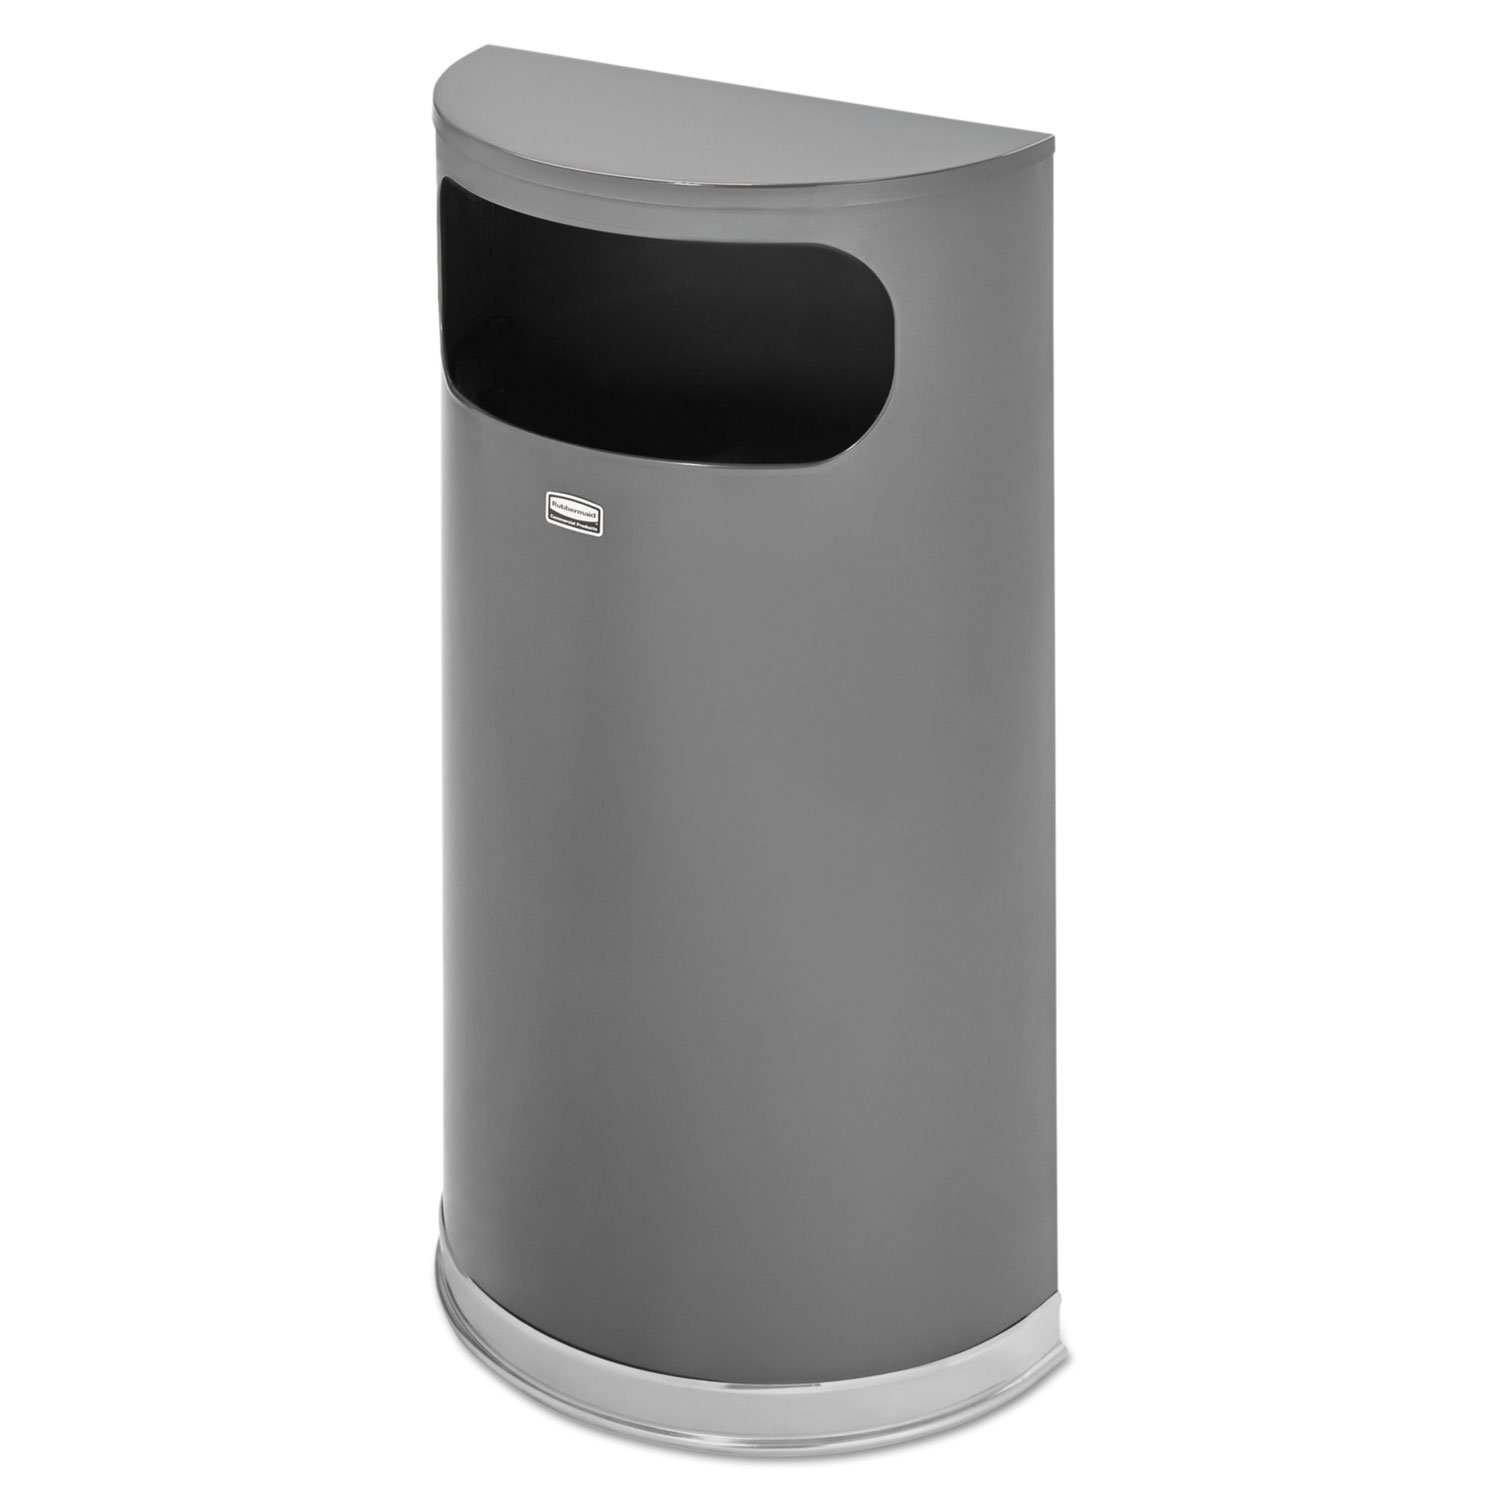  Rubbermaid Commercial FGSO820PLANT Half Round Flat Top Waste Receptacle, 9 gal, Anthracite Metallic w/Chrome Trim (RCPSO820PLANT) 